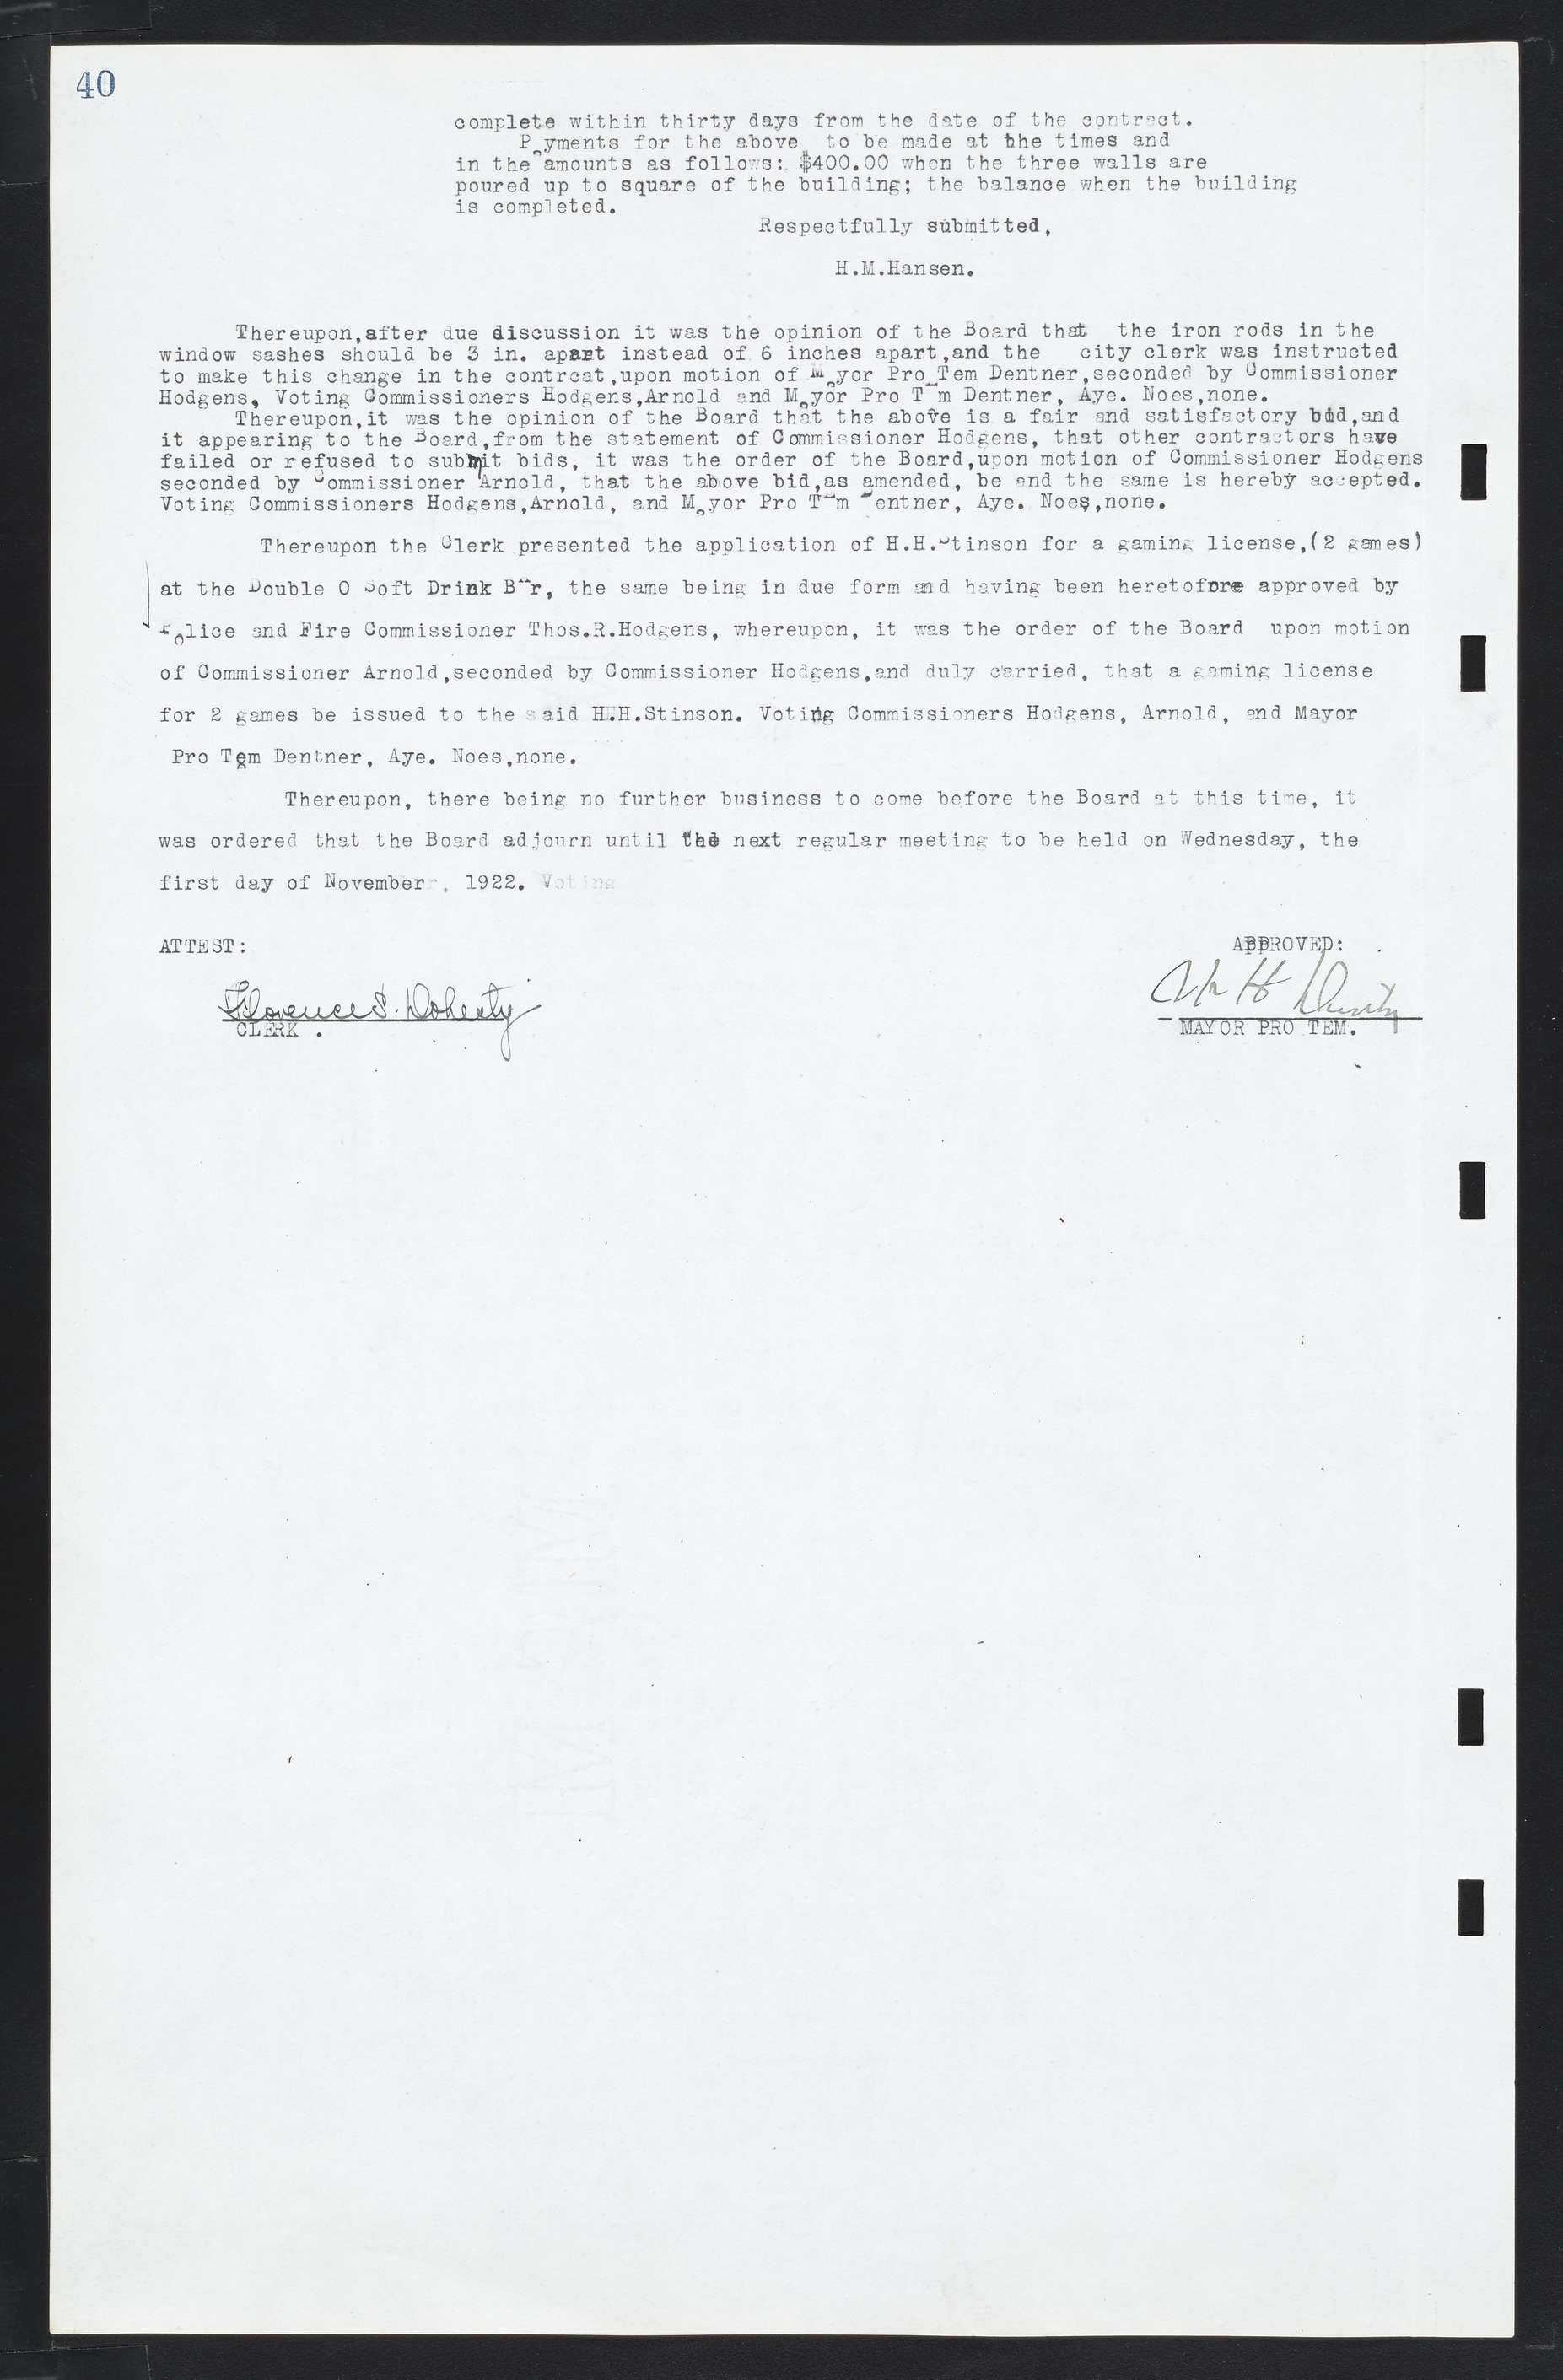 Las Vegas City Commission Minutes, March 1, 1922 to May 10, 1929, lvc000002-47